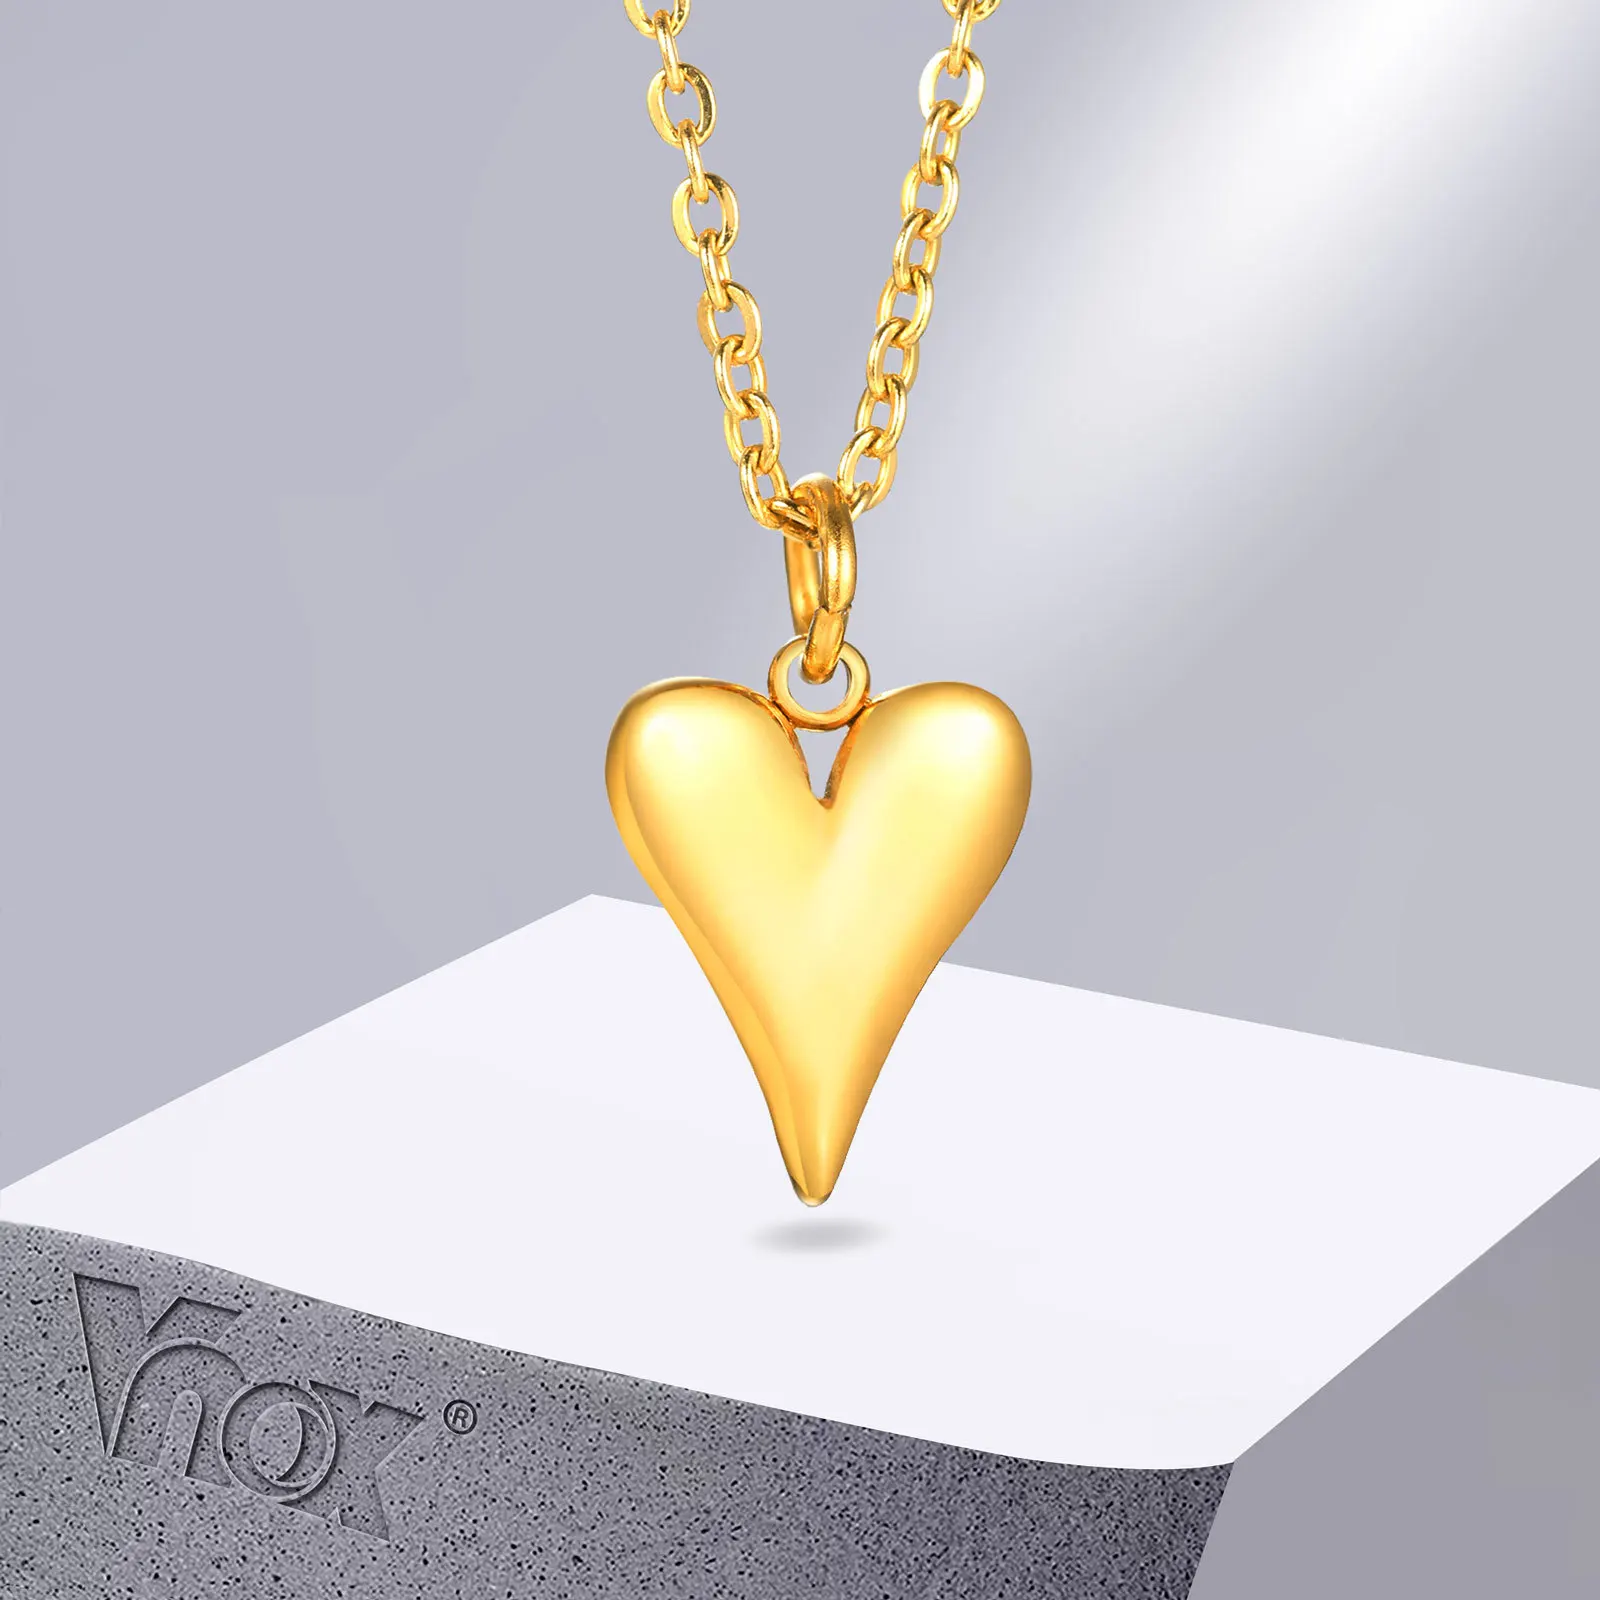 Authentic LV Key on Gold-Filled Paperclip Chain with Heart